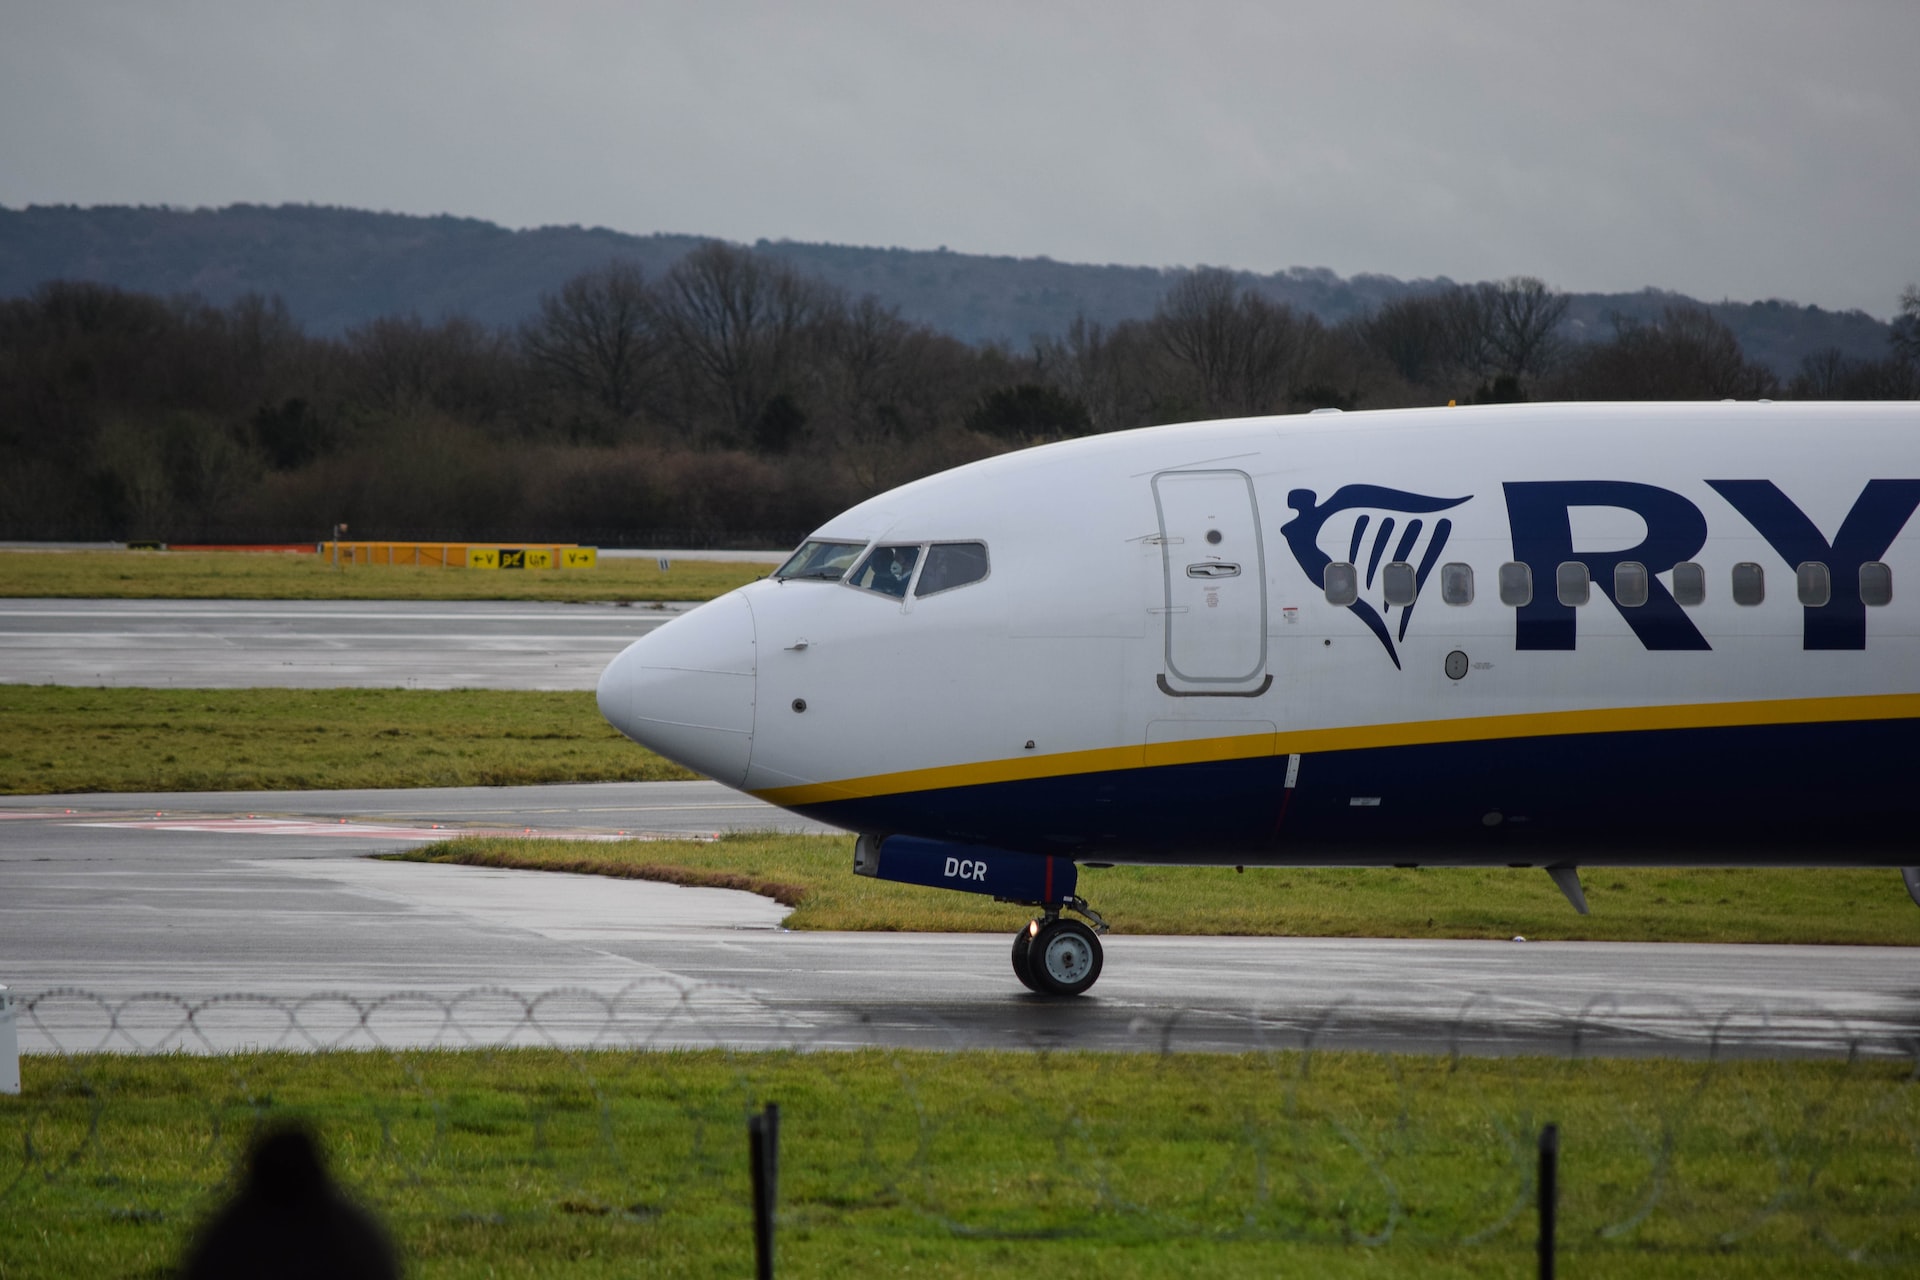 Ryanair aircraft taxiing to the runway on a rainy day.